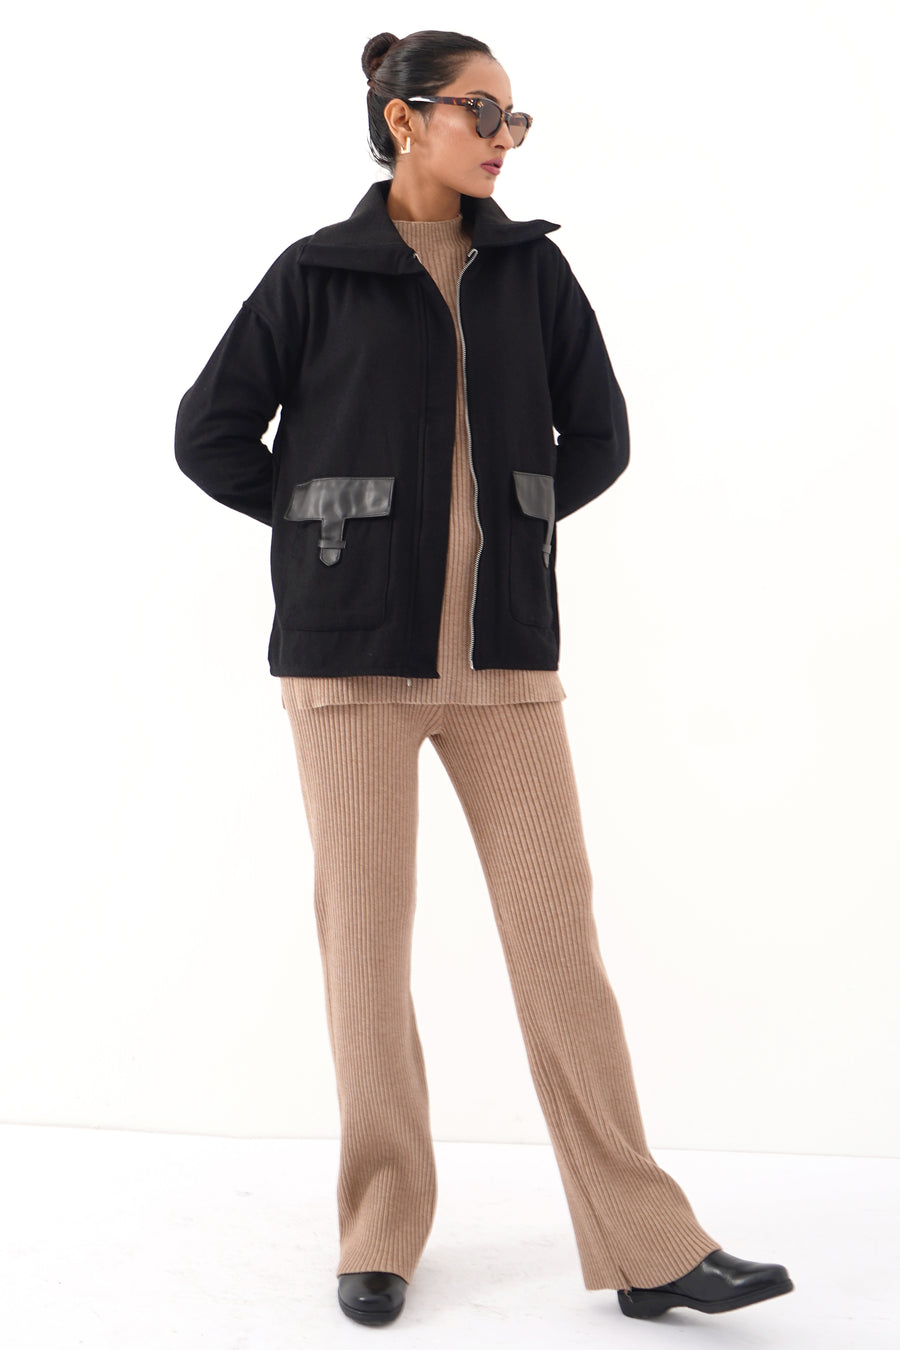 Nora Woolen Jacket (10 days delivery time)